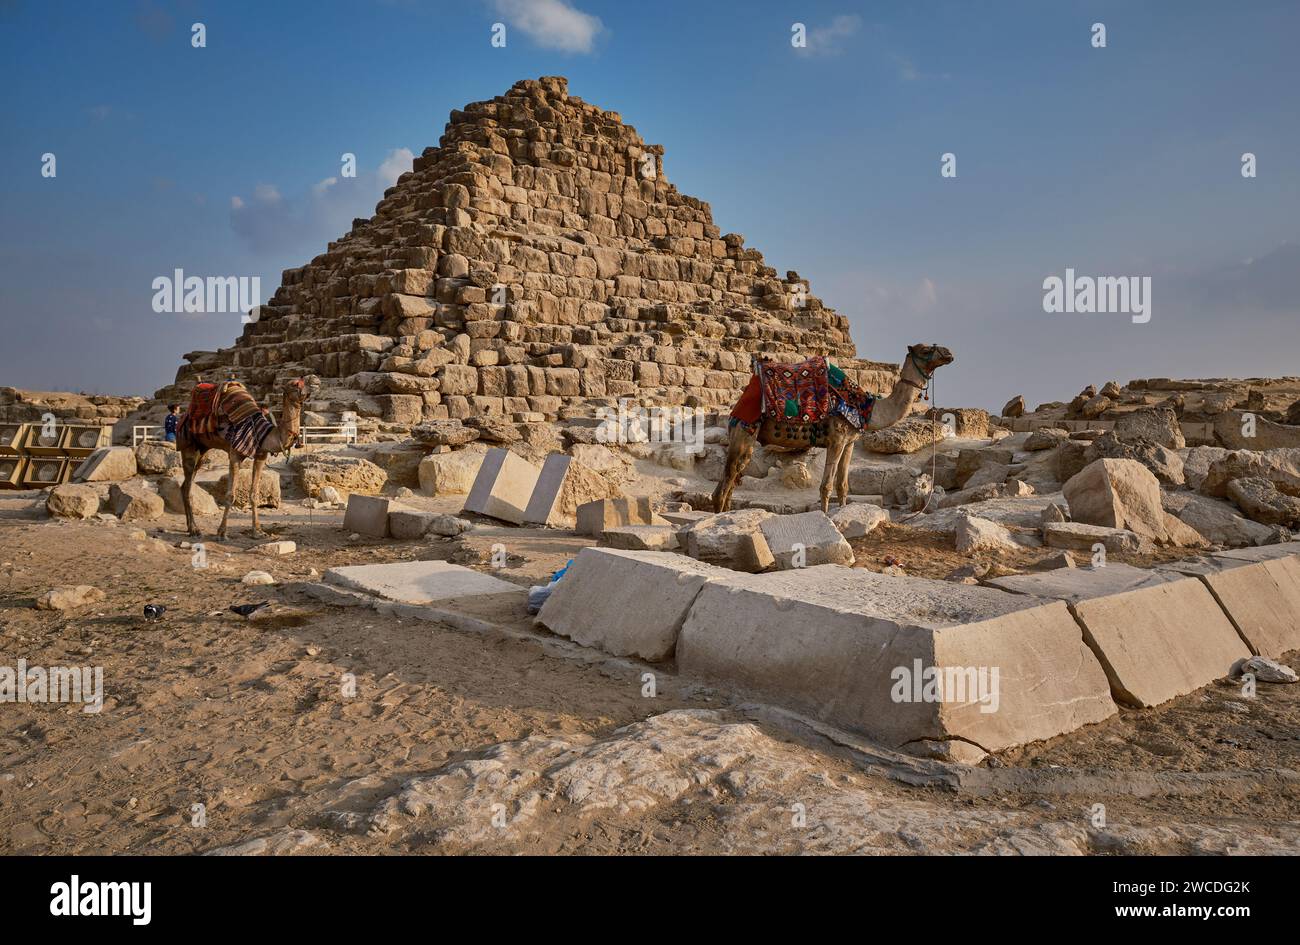 The Giza pyramid complex (Giza necropolis) afternoon shot showing the three main pyramids at Giza, Egypt together with subsidiary pyramids Stock Photo